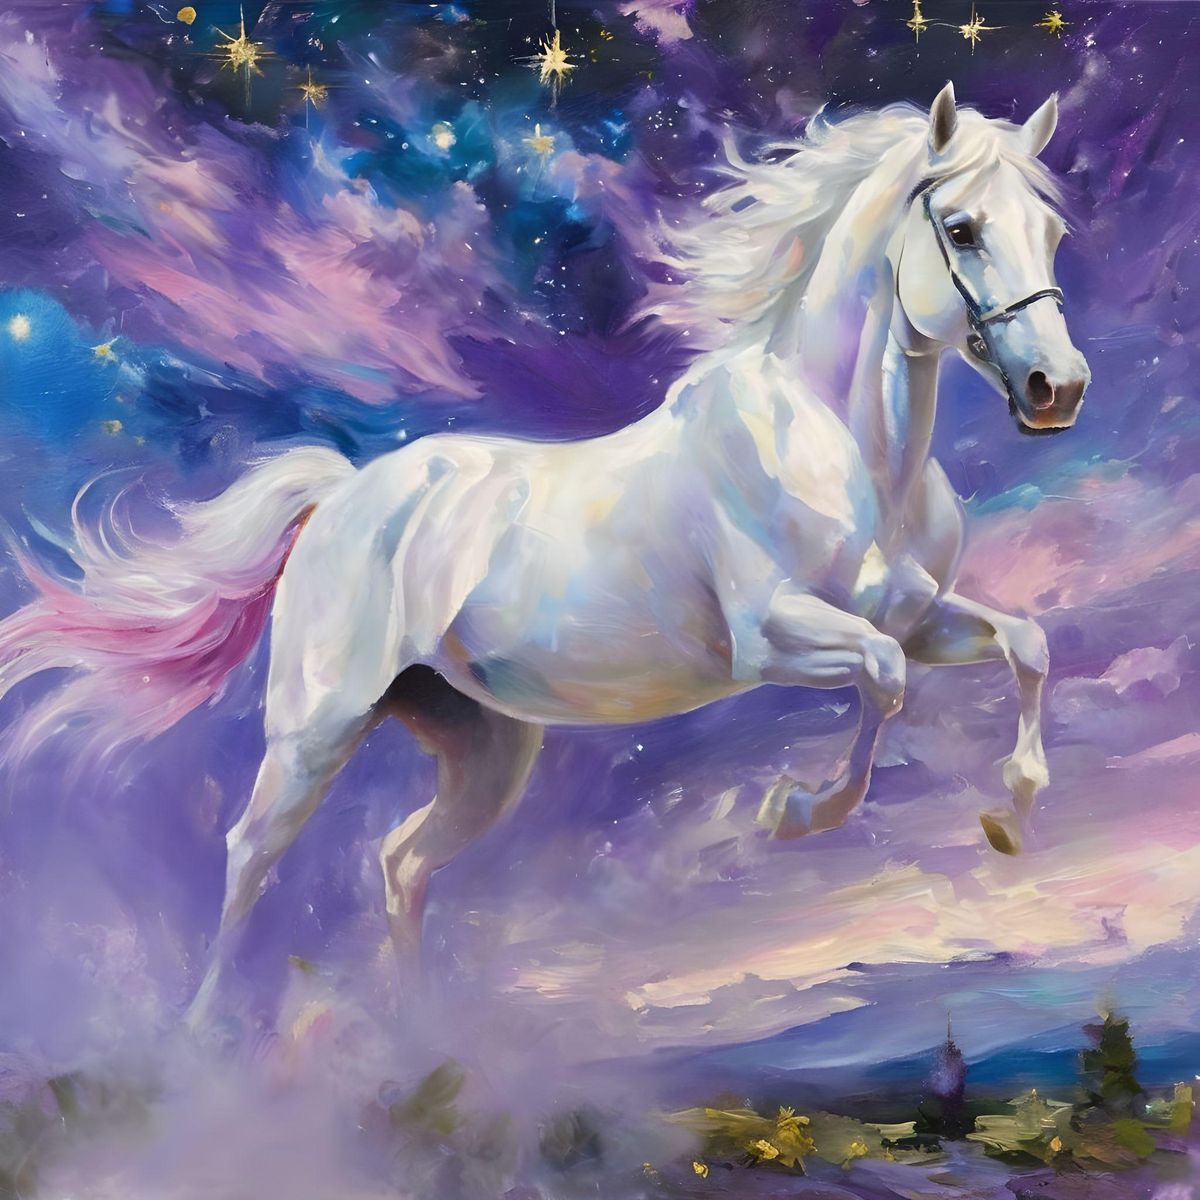 a white stallion pegasus flying in the air with a white long horn dusted in gold and embroided shooting out magic, and glass wings reflecting the colors of pink, purple, and blue, flying through a galaxy night sky with stars and clouds along the bottom painted in purple, blue, green, and yellow light